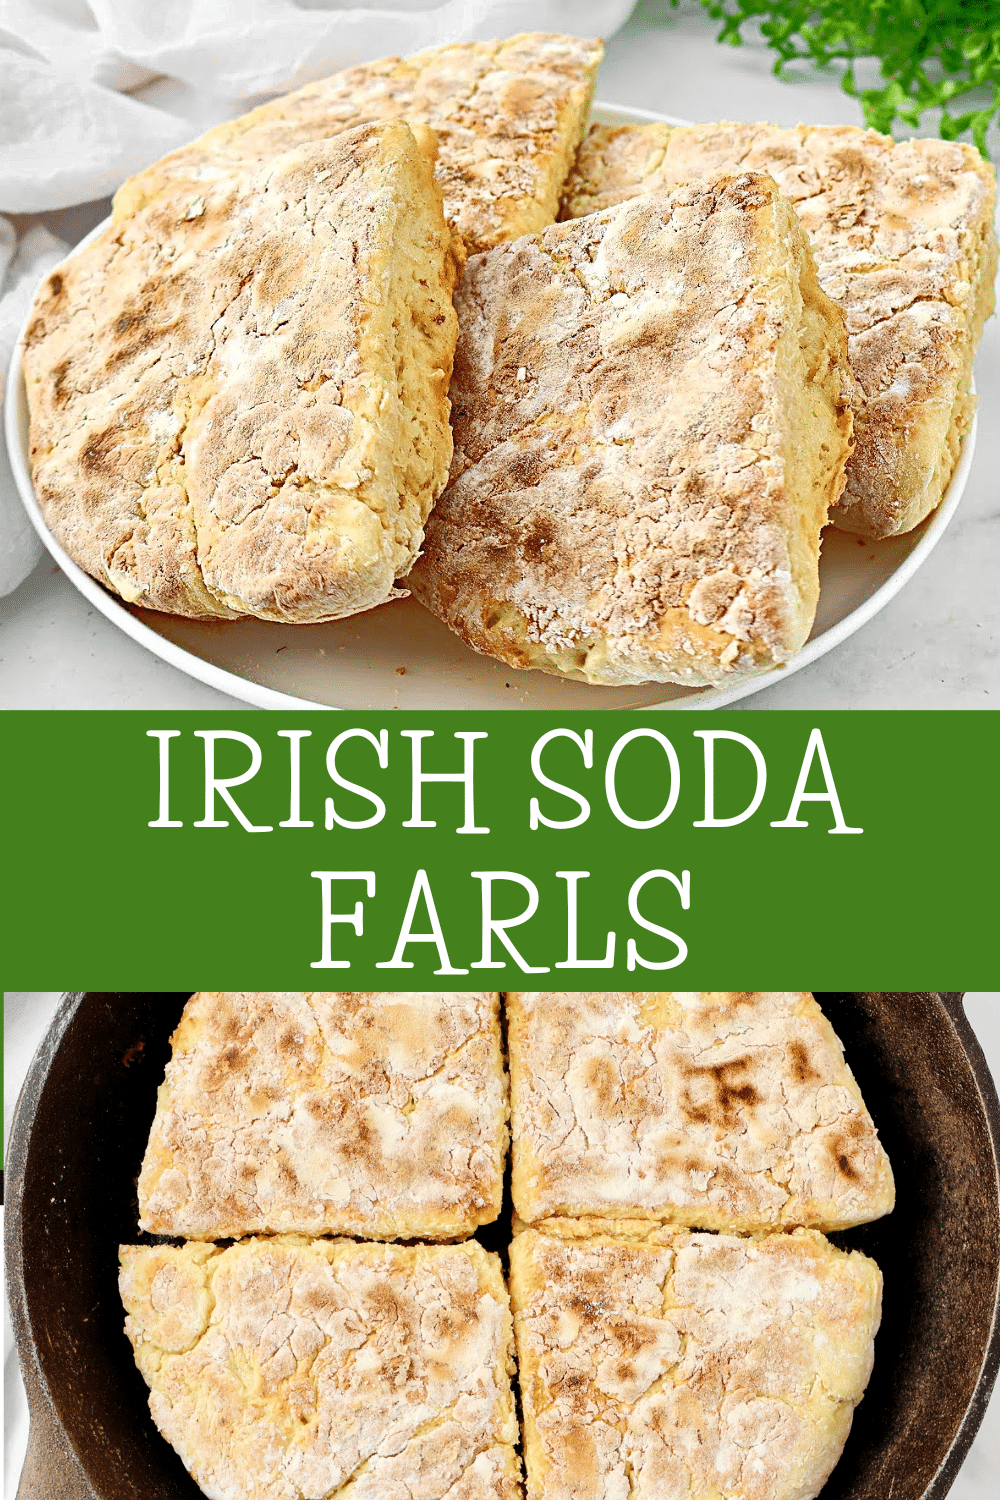 Irish Soda Farls ~ Hearty and rustic traditional Irish bread. Easy to make with simple plant-based ingredients. Vegan and Vegetarian. via @thiswifecooks